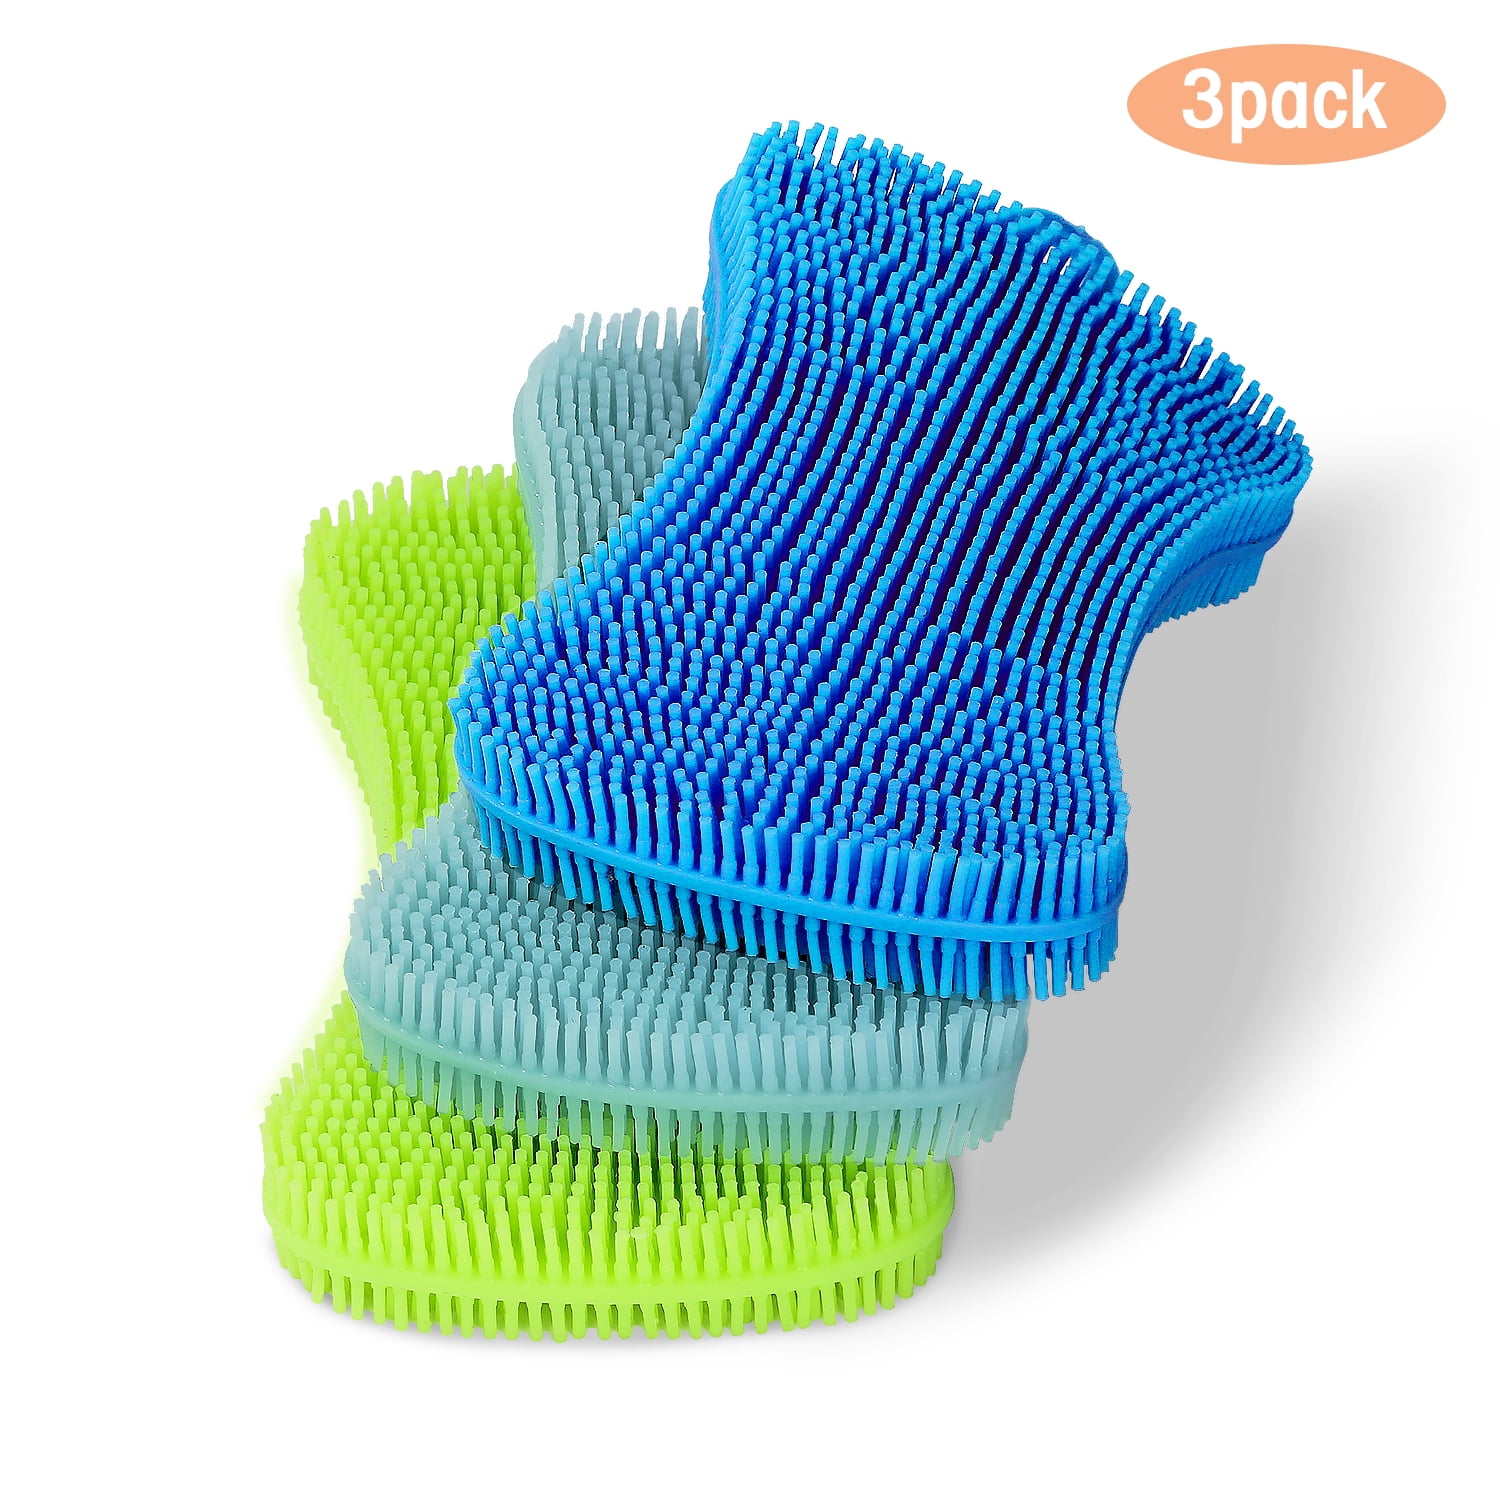 NEW! Set of 3 Colored Textured Silicone Sponges Mildew-Free Better Sponge 